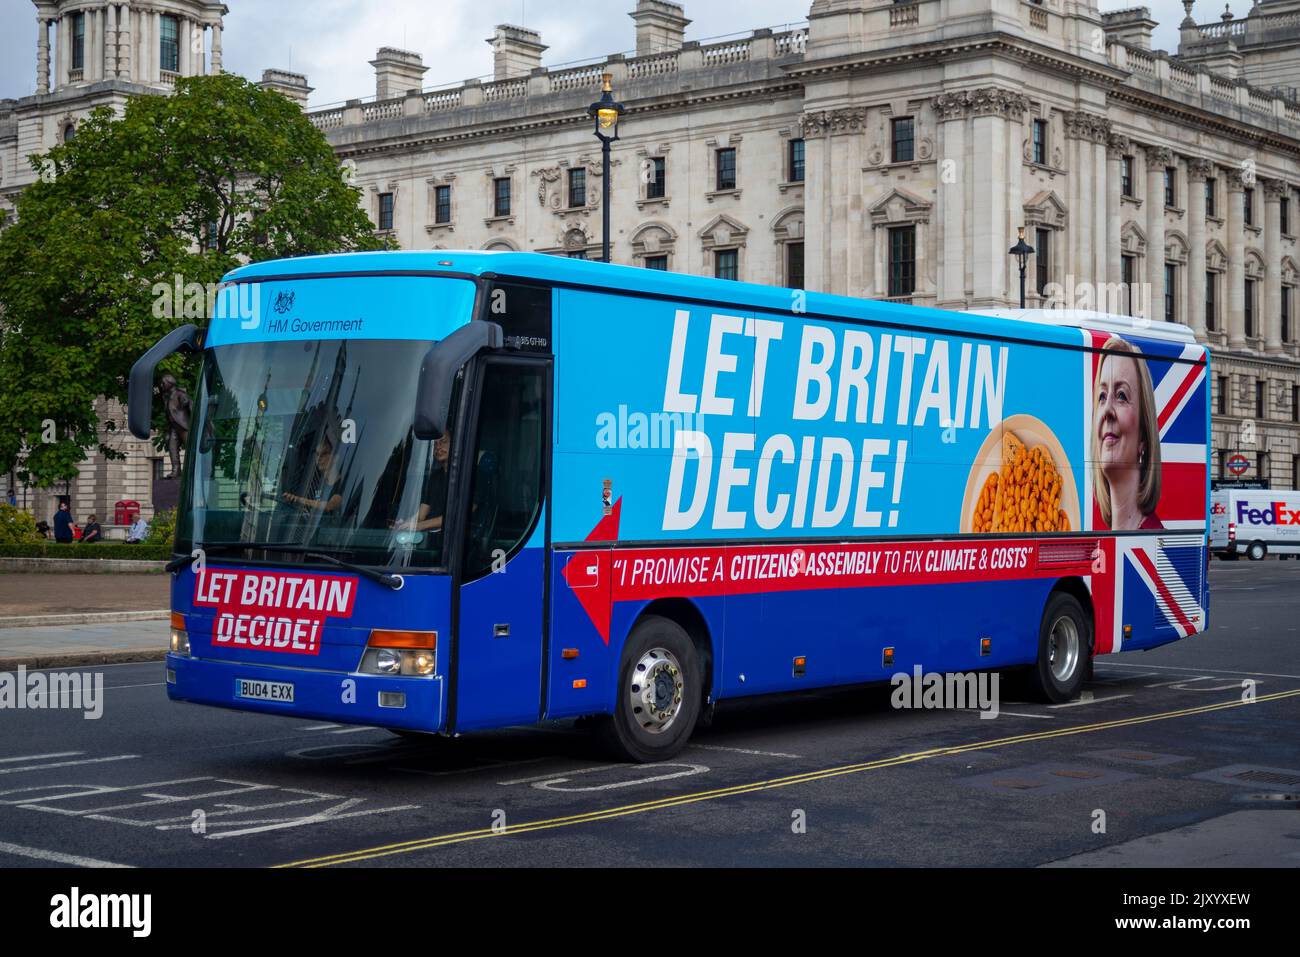 A hoax bus from Extinction Rebellion with the appearance of a Liz Truss campaign bus. Citizen's assembly to fix climate & costs. Let Britain Decide Stock Photo